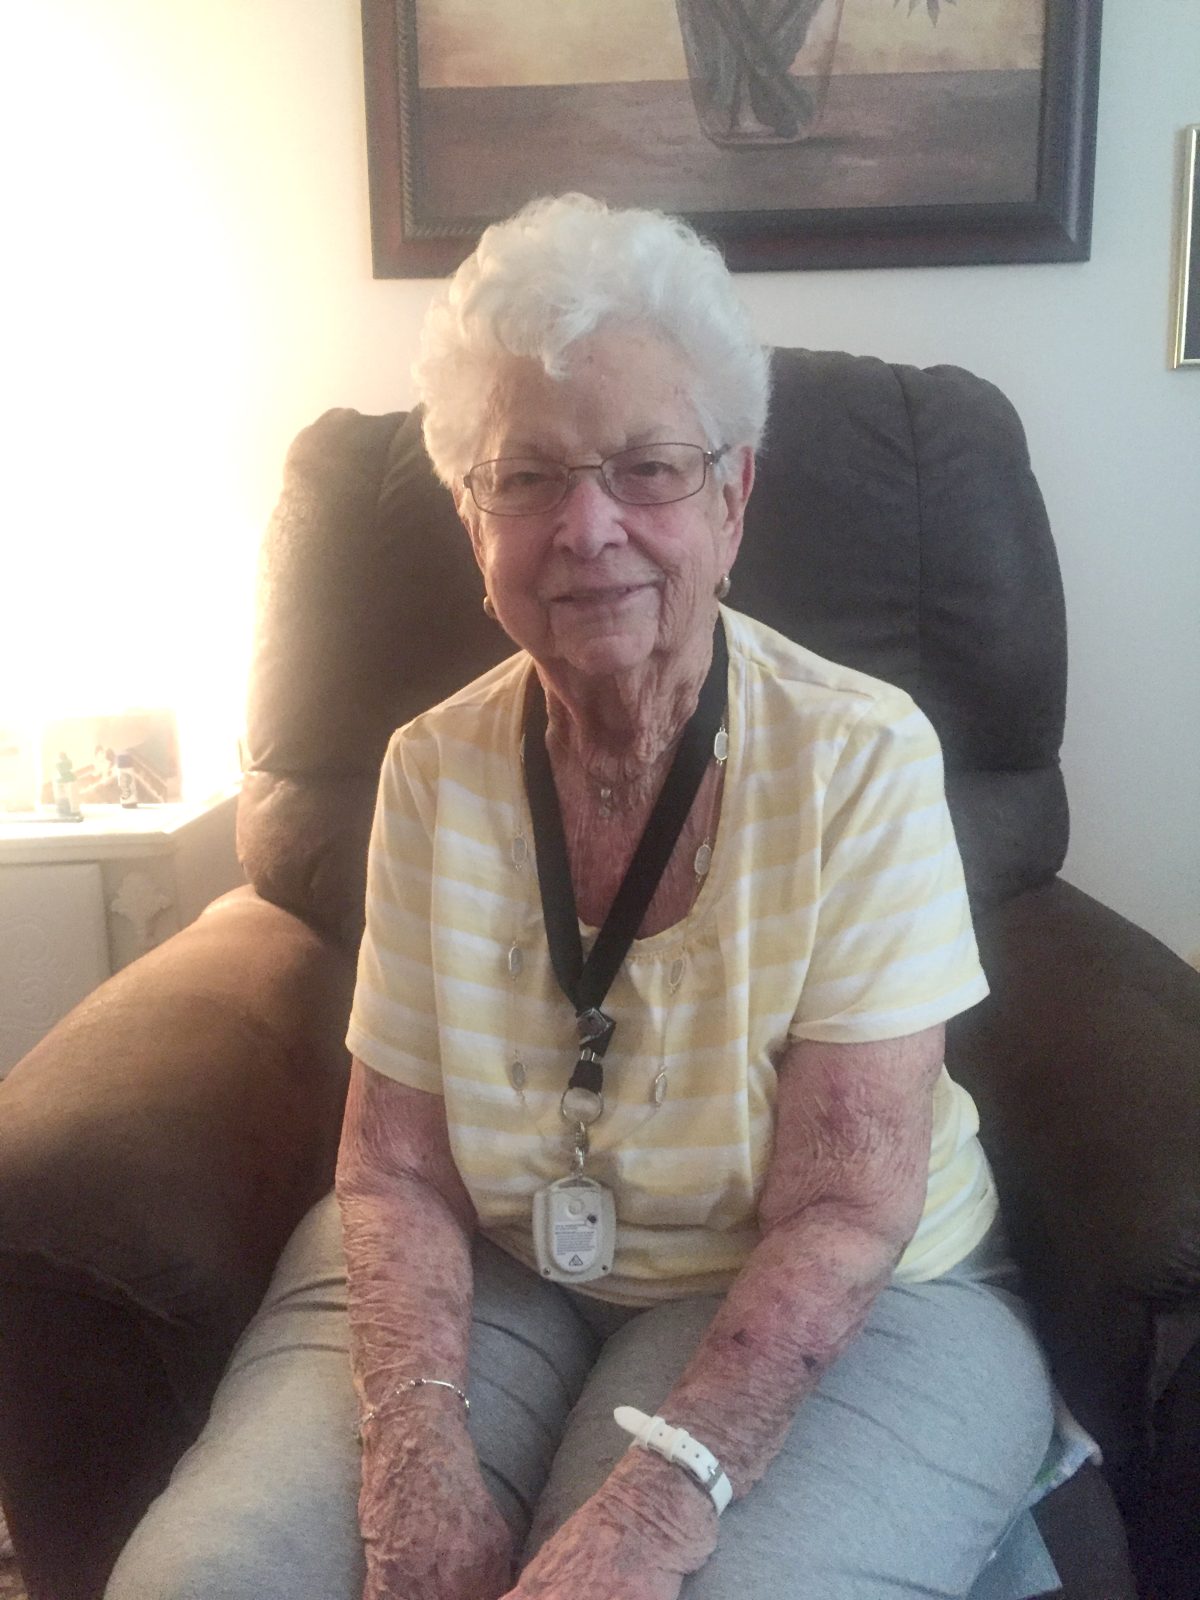 Age is just a number: Manoir McGill resident celebrates 100th birhtday